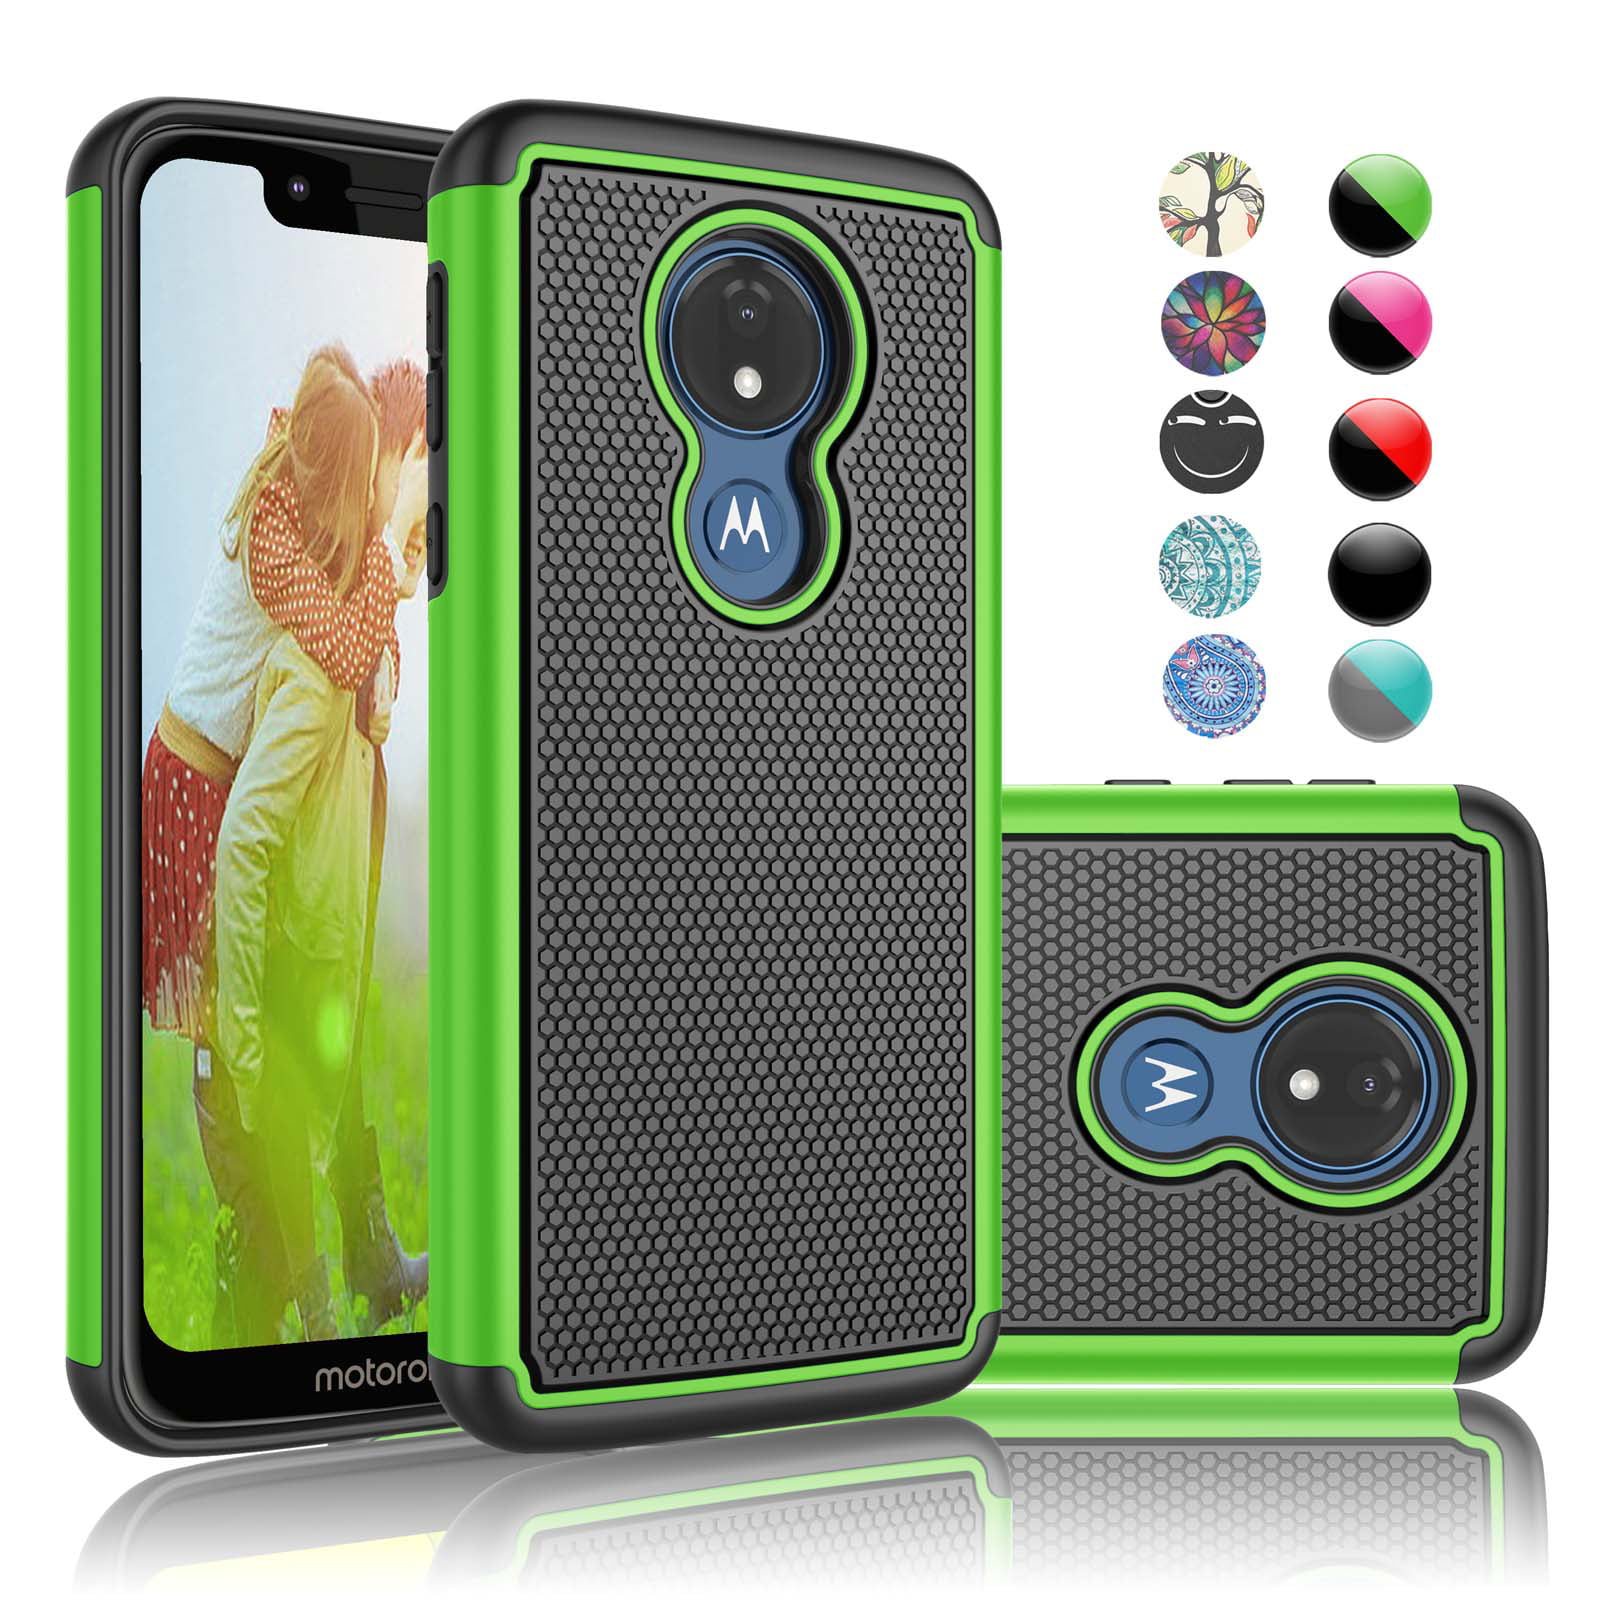 Moto G7 Play Case, Sturdy Cases for Motorola G7 Play, Njjex Rugged Rubber Shock Absorbing Plastic Scratch Resistant Defender Bumper Slim Grip Hard Cover Cases For Motorola G7 Play XT1952 -Green